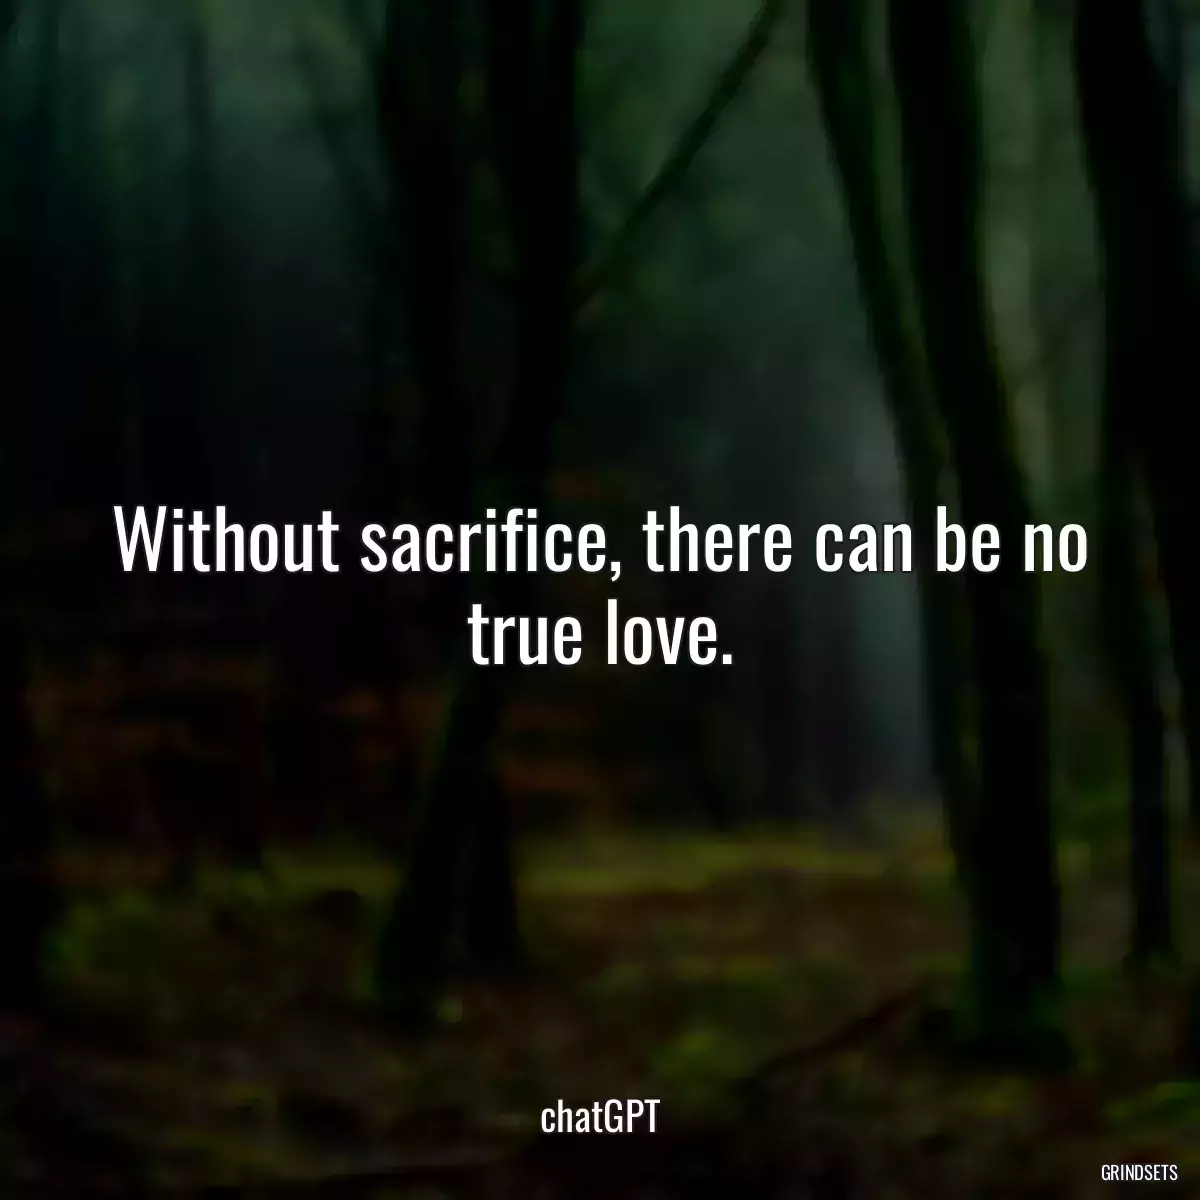 Without sacrifice, there can be no true love.